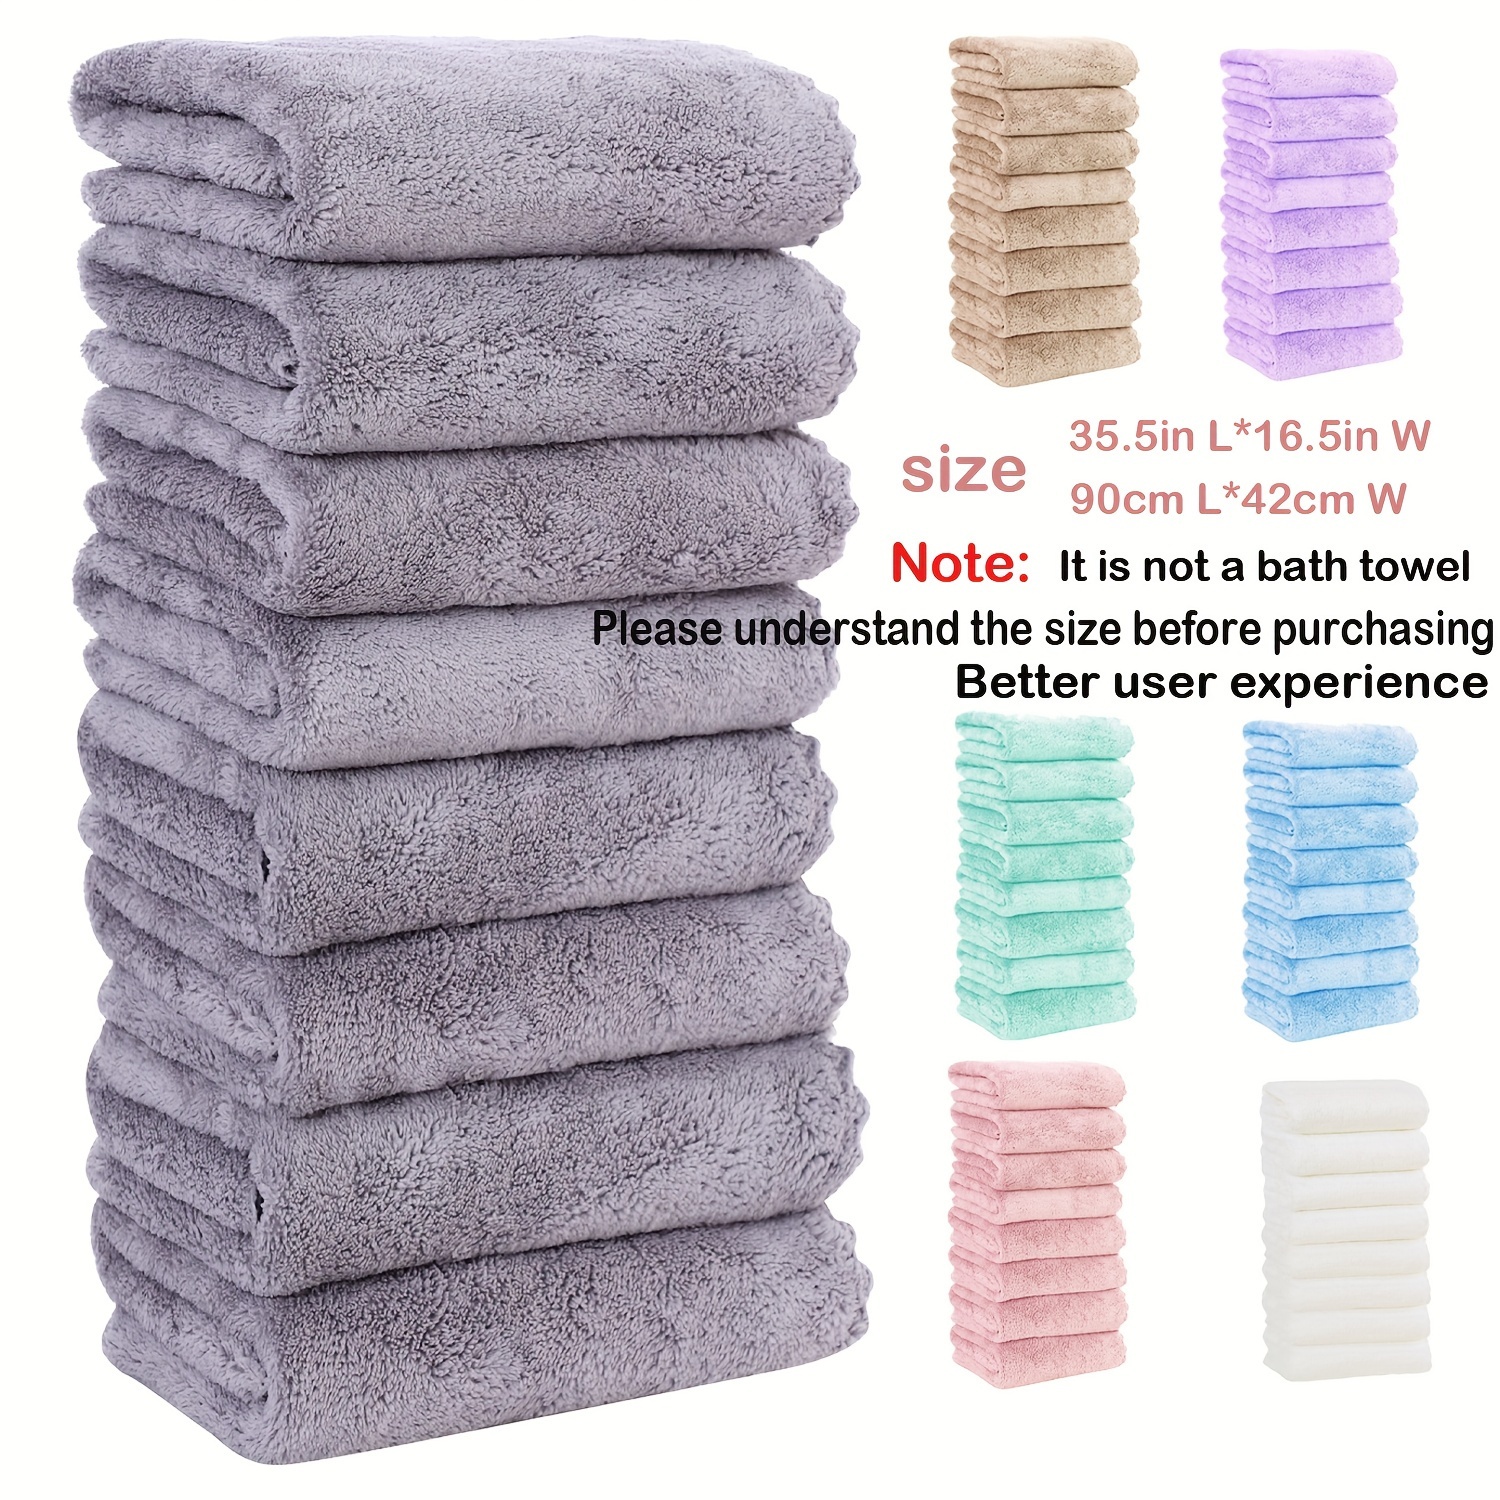 

8pcs Multi-color Microfiber Coral Fleece Hand Towels, 35.5in L X 16.5in W, Quick Absorbent For Hair Drying, Car Wiping, Sports, And Travel, Contemporary Home & Outdoor Use